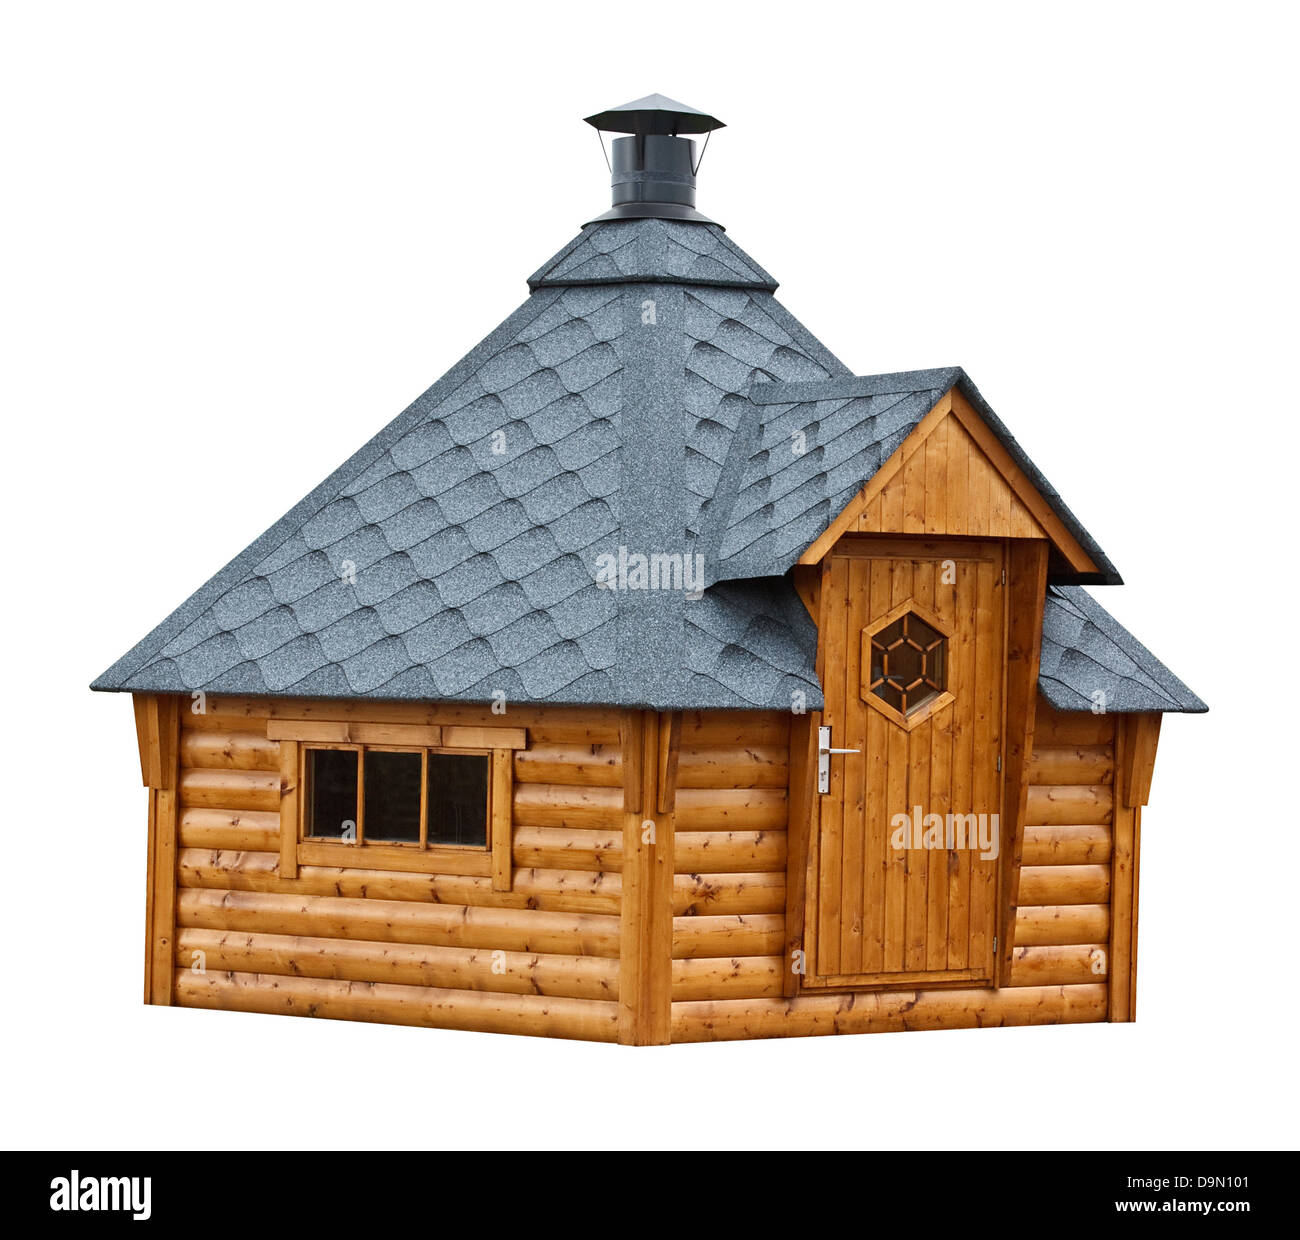 Outdoor wooden shed with chimney, popular in the netherlands for housing a sauna or barbecue Stock Photo